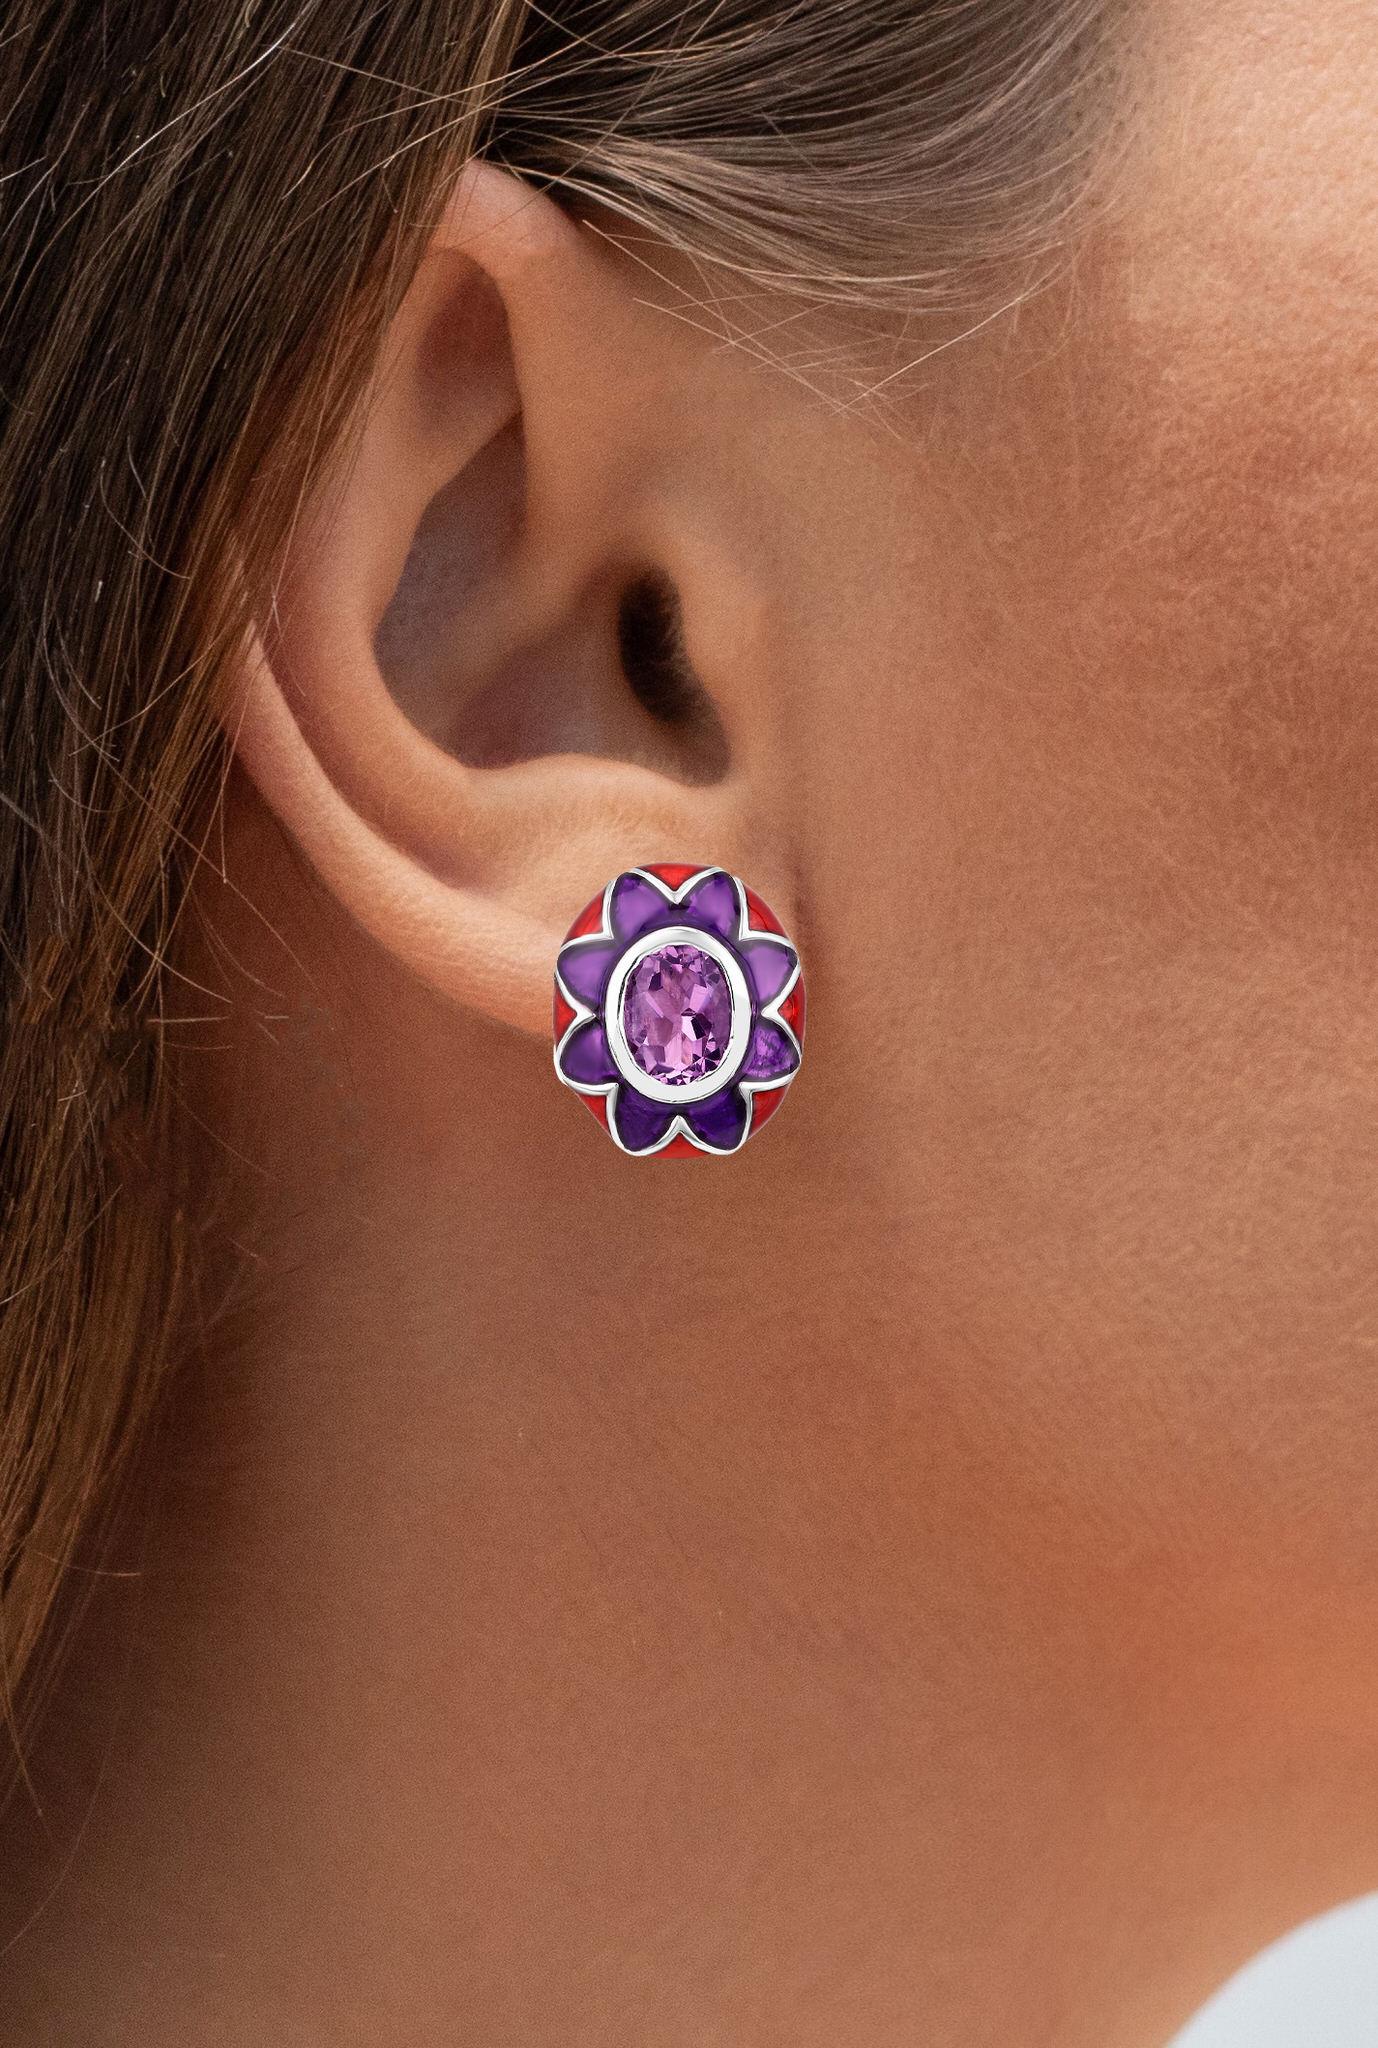 It comes with the Gemological Appraisal by GIA GG/AJP
All Gemstones are Natural
2 Amethysts = 2.30 Carats
Enamel: Purple, Red
Metal: Rhodium Plated Sterling Silver
Post With Friction Back
Dimensions: 16.5 x 14.2 mm